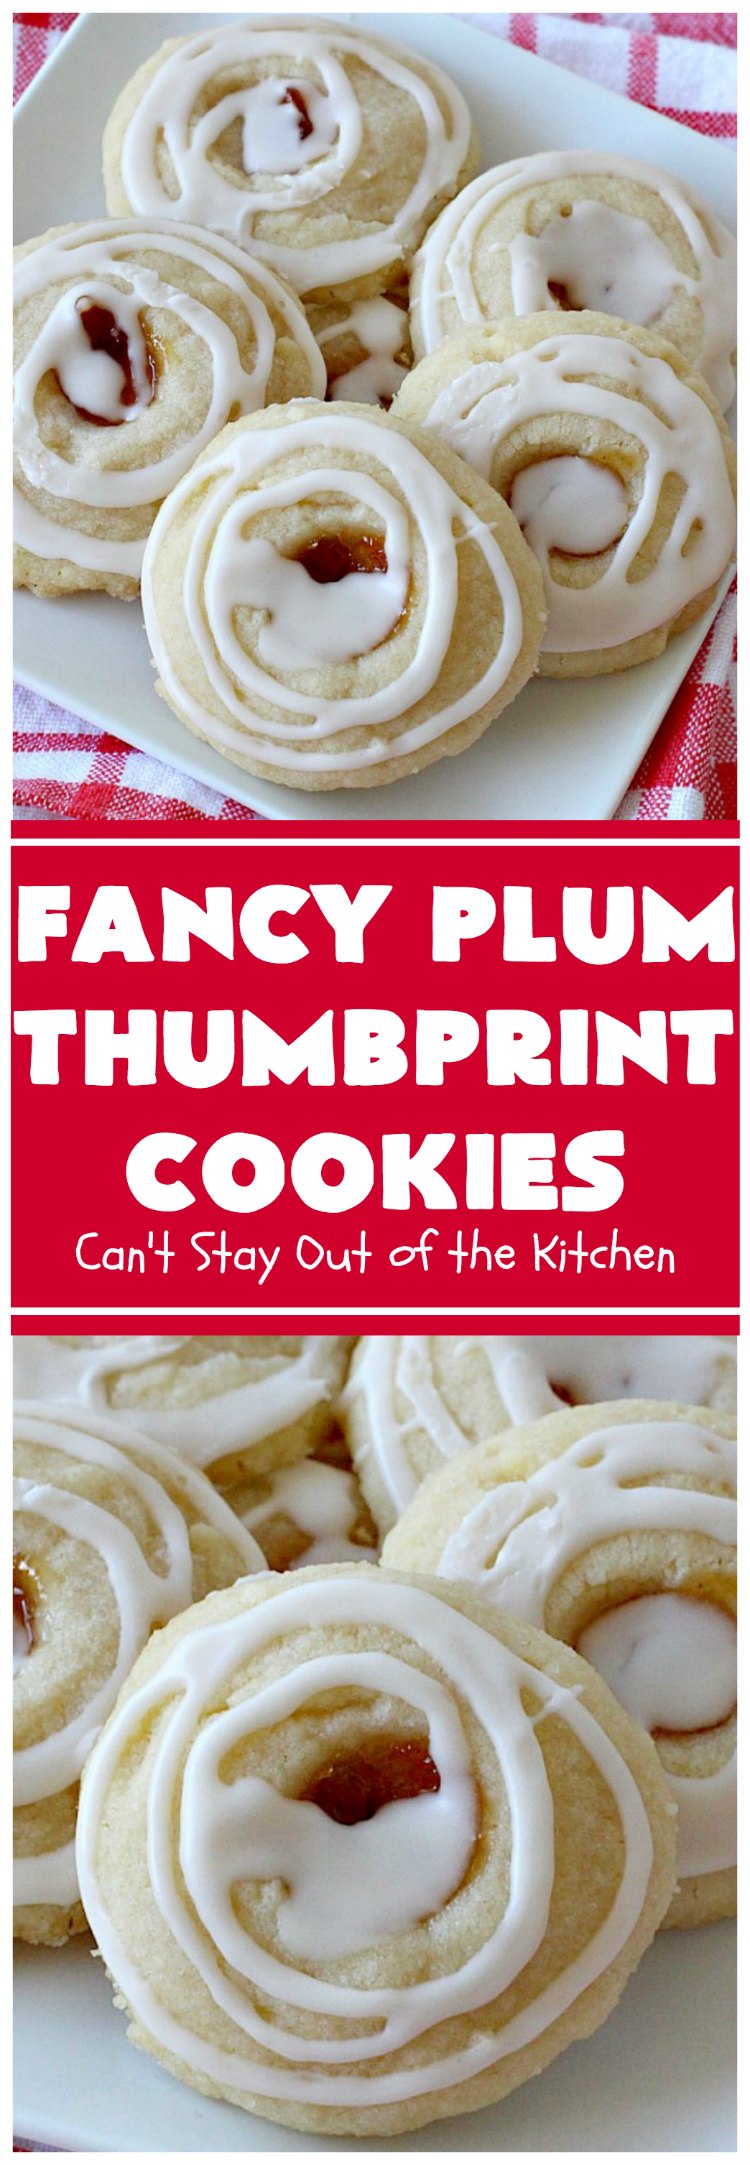 Fancy Plum Thumbprint Cookies | Can't Stay Out of the Kitchen | marvelous #cookie for any kind of #holiday, backyard BBQ, potluck or family reunion. #dessert